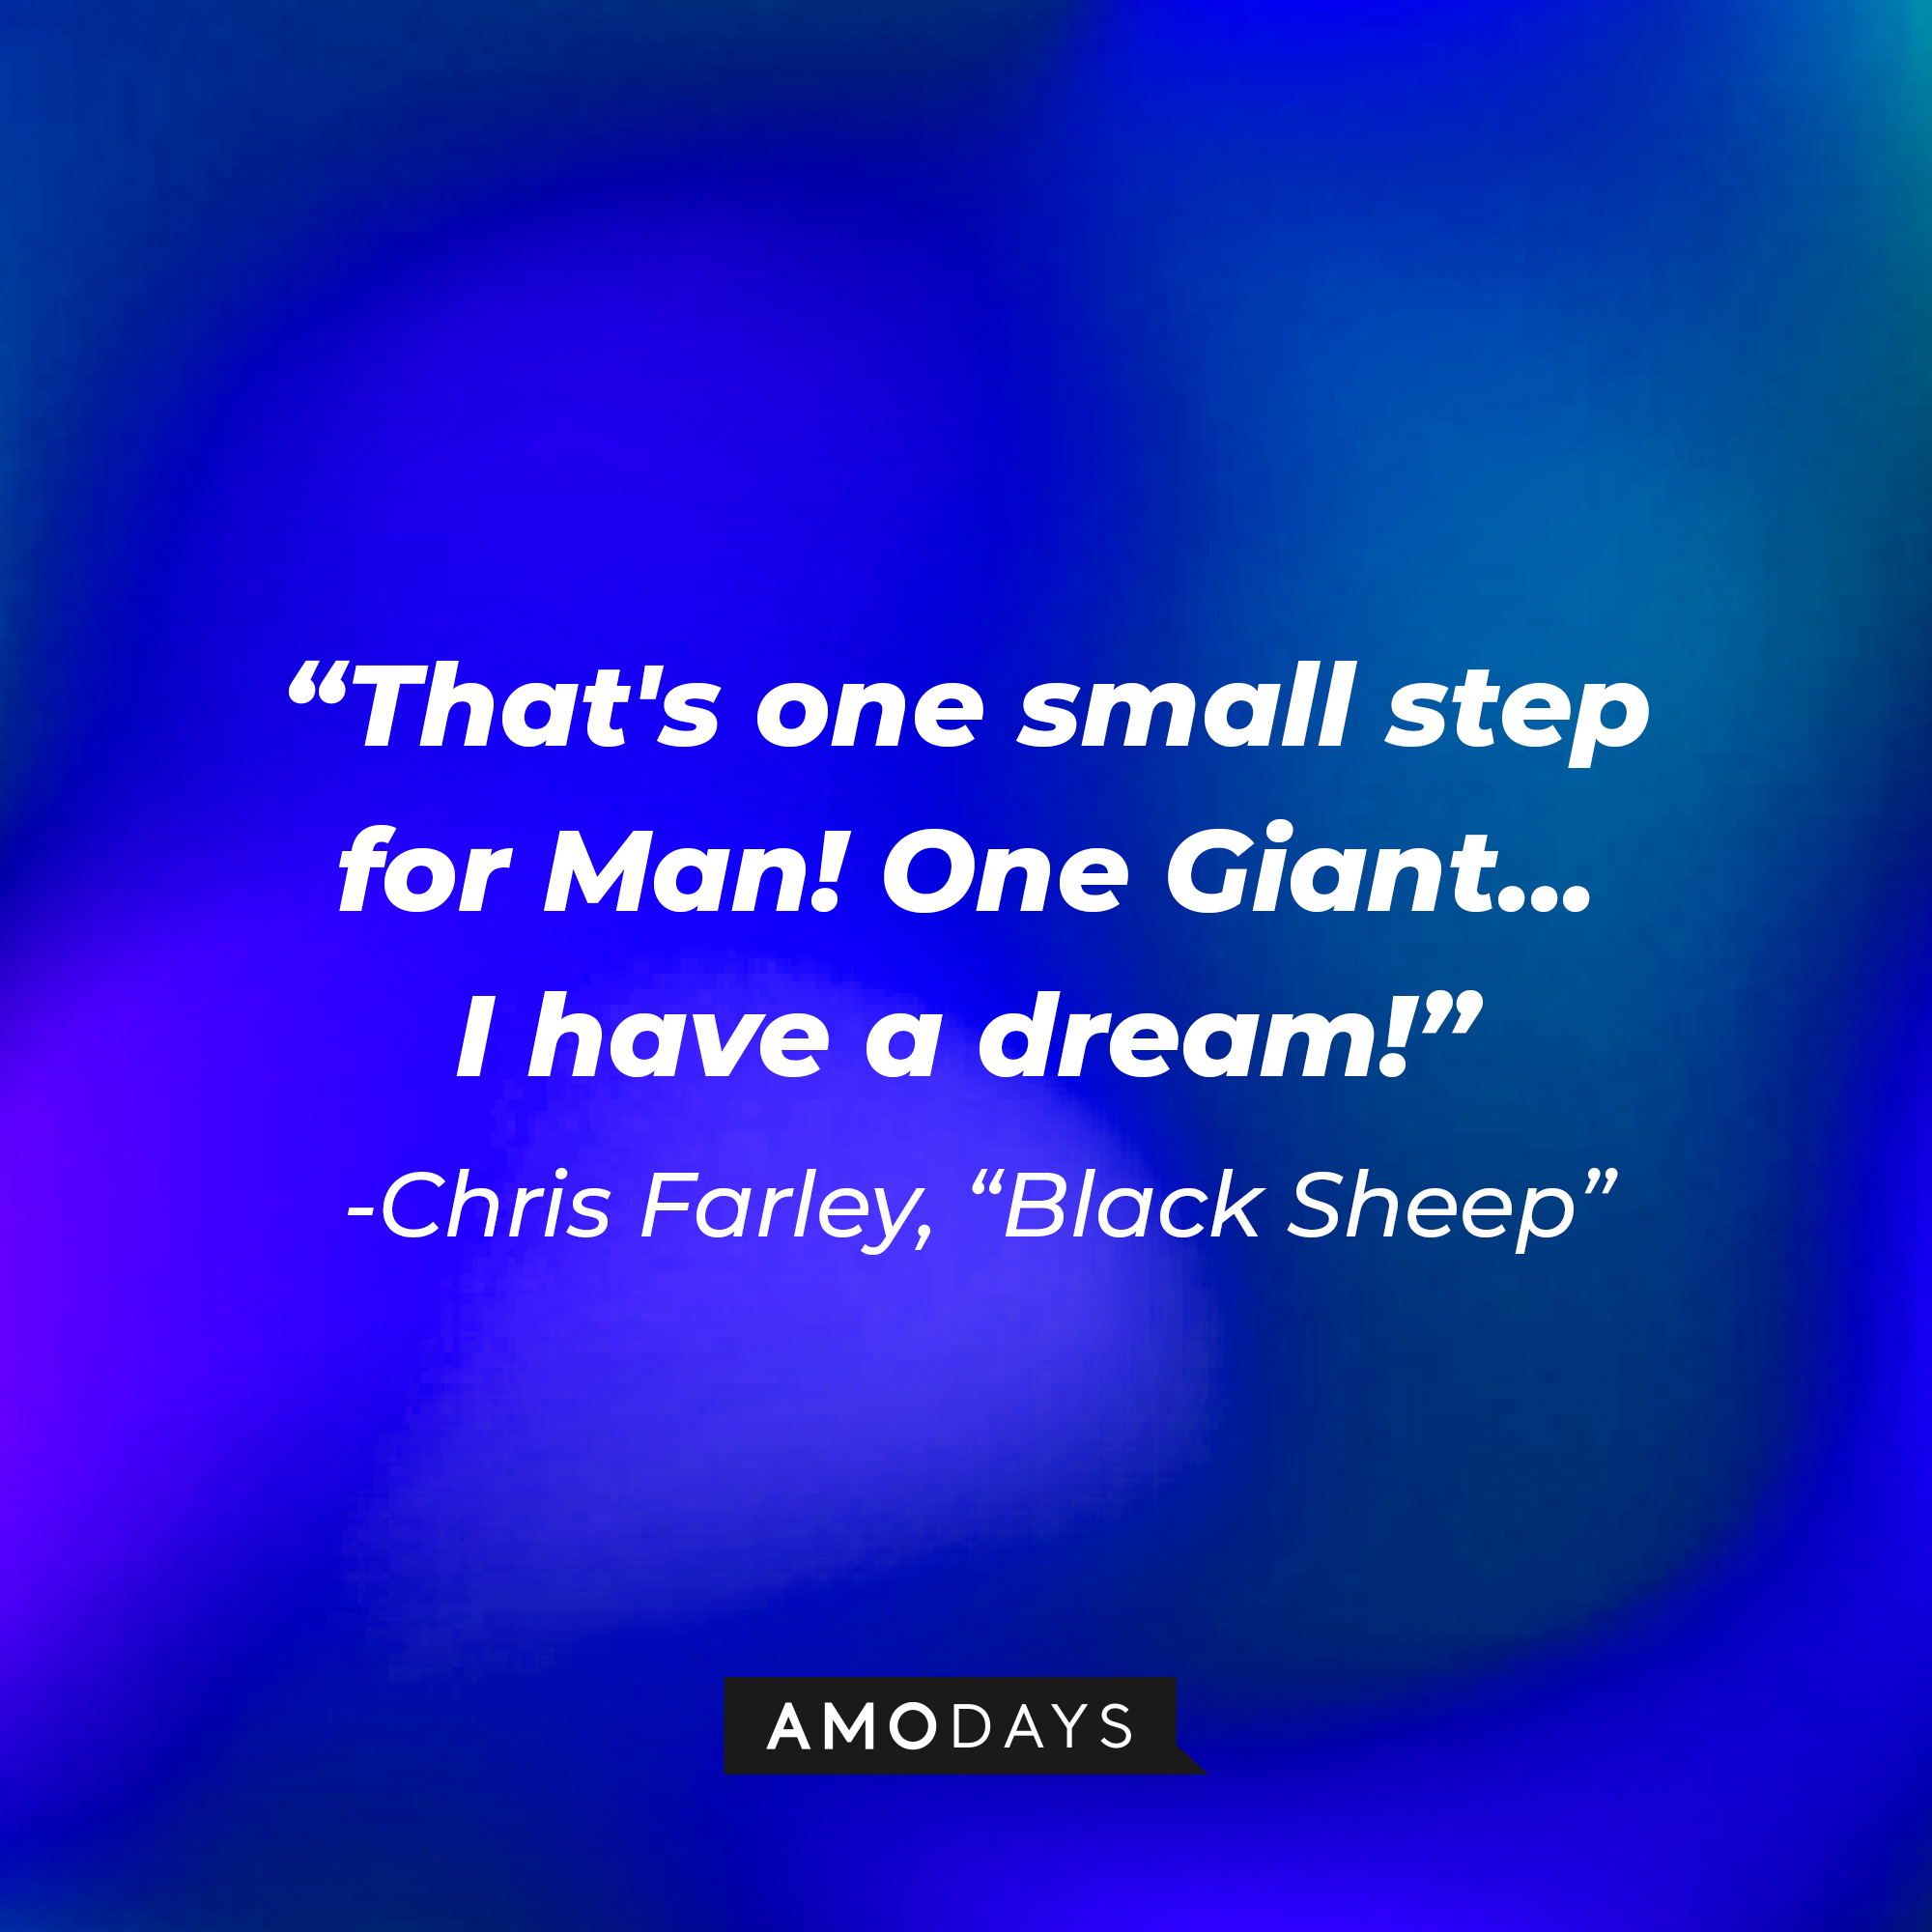 Chris Farley's, "Black Sheep" quote: "That's one small step for Man! One Giant...I have a dream!" | Source: Amodays